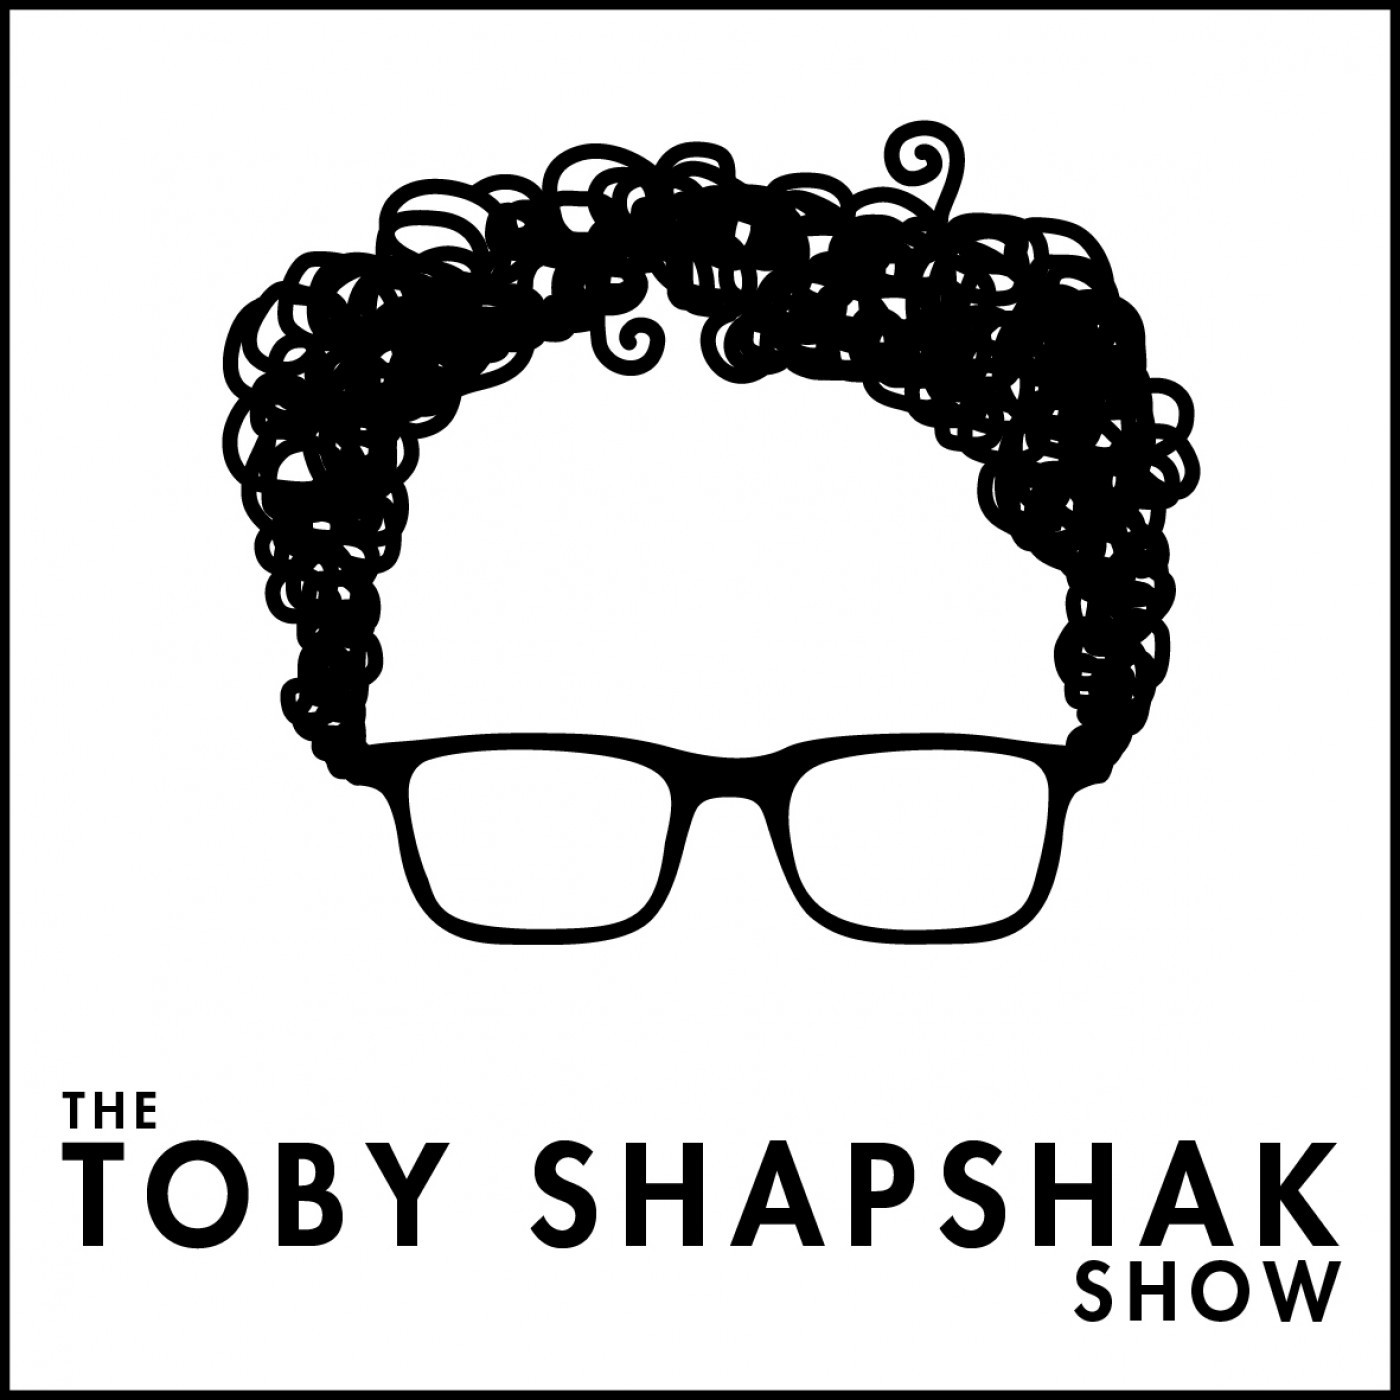 Chris Anderson on TED – The Toby Shapshak Show